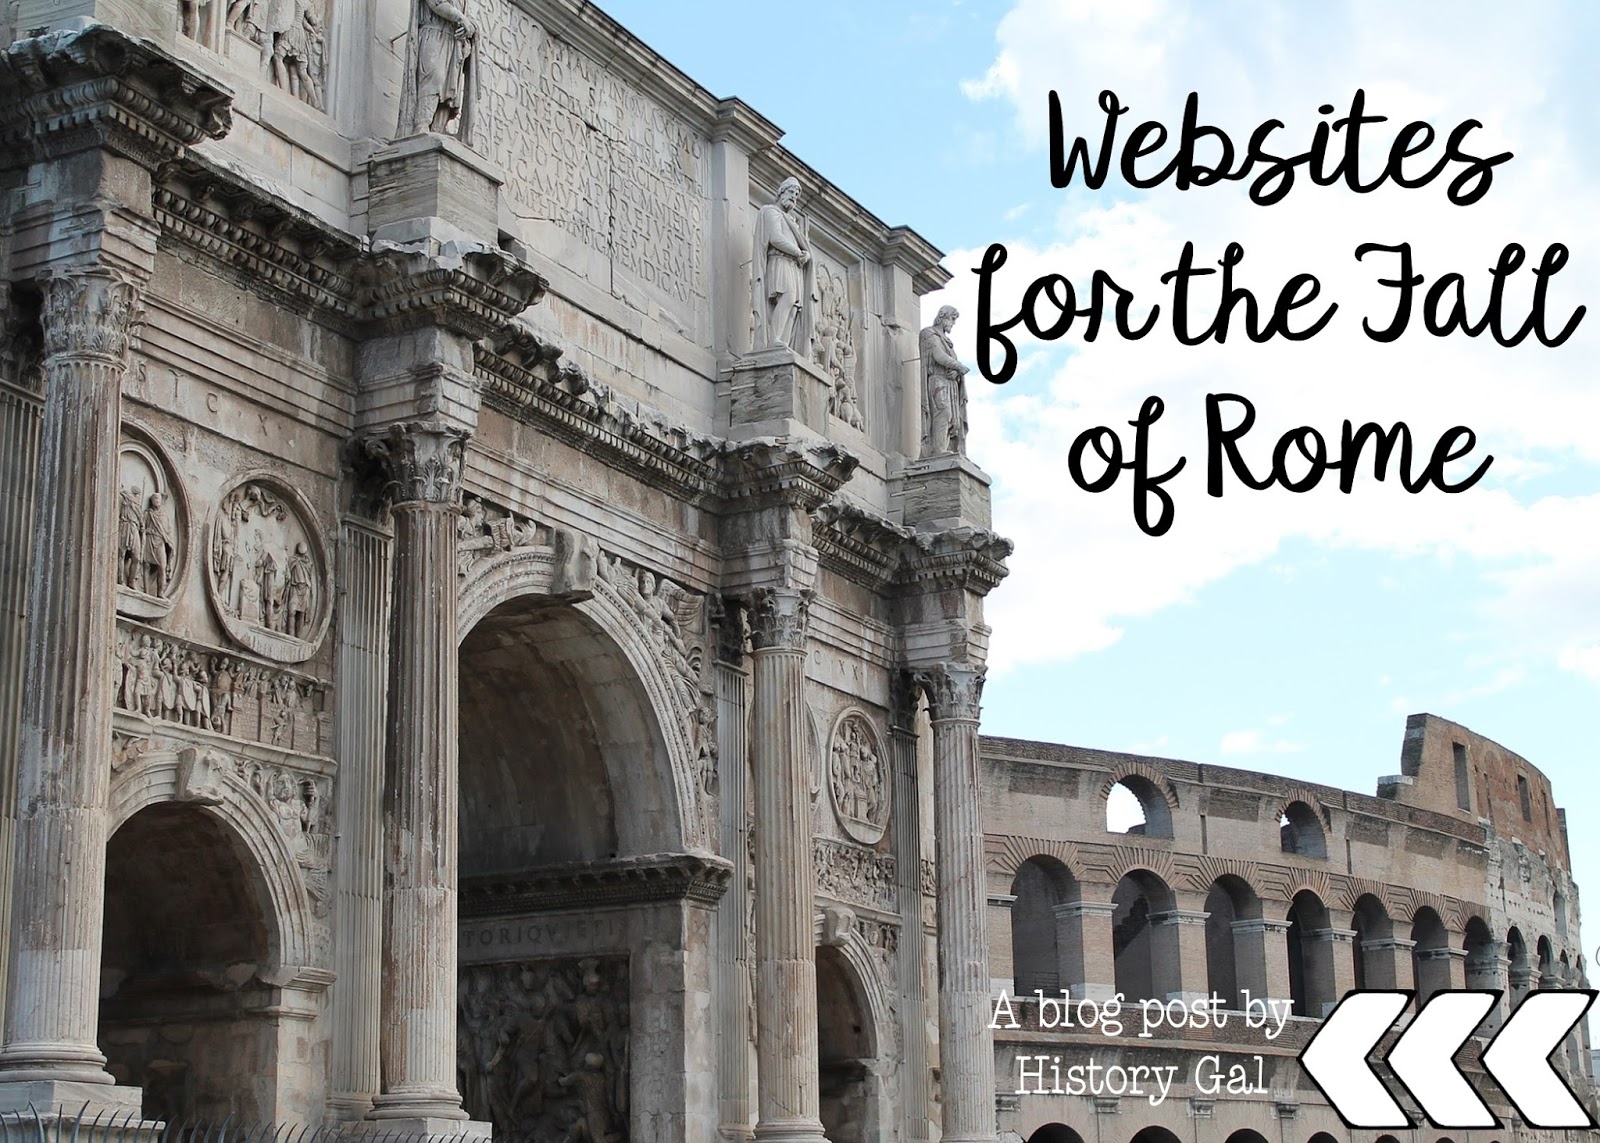 Fall of Rome Websites By History Gal